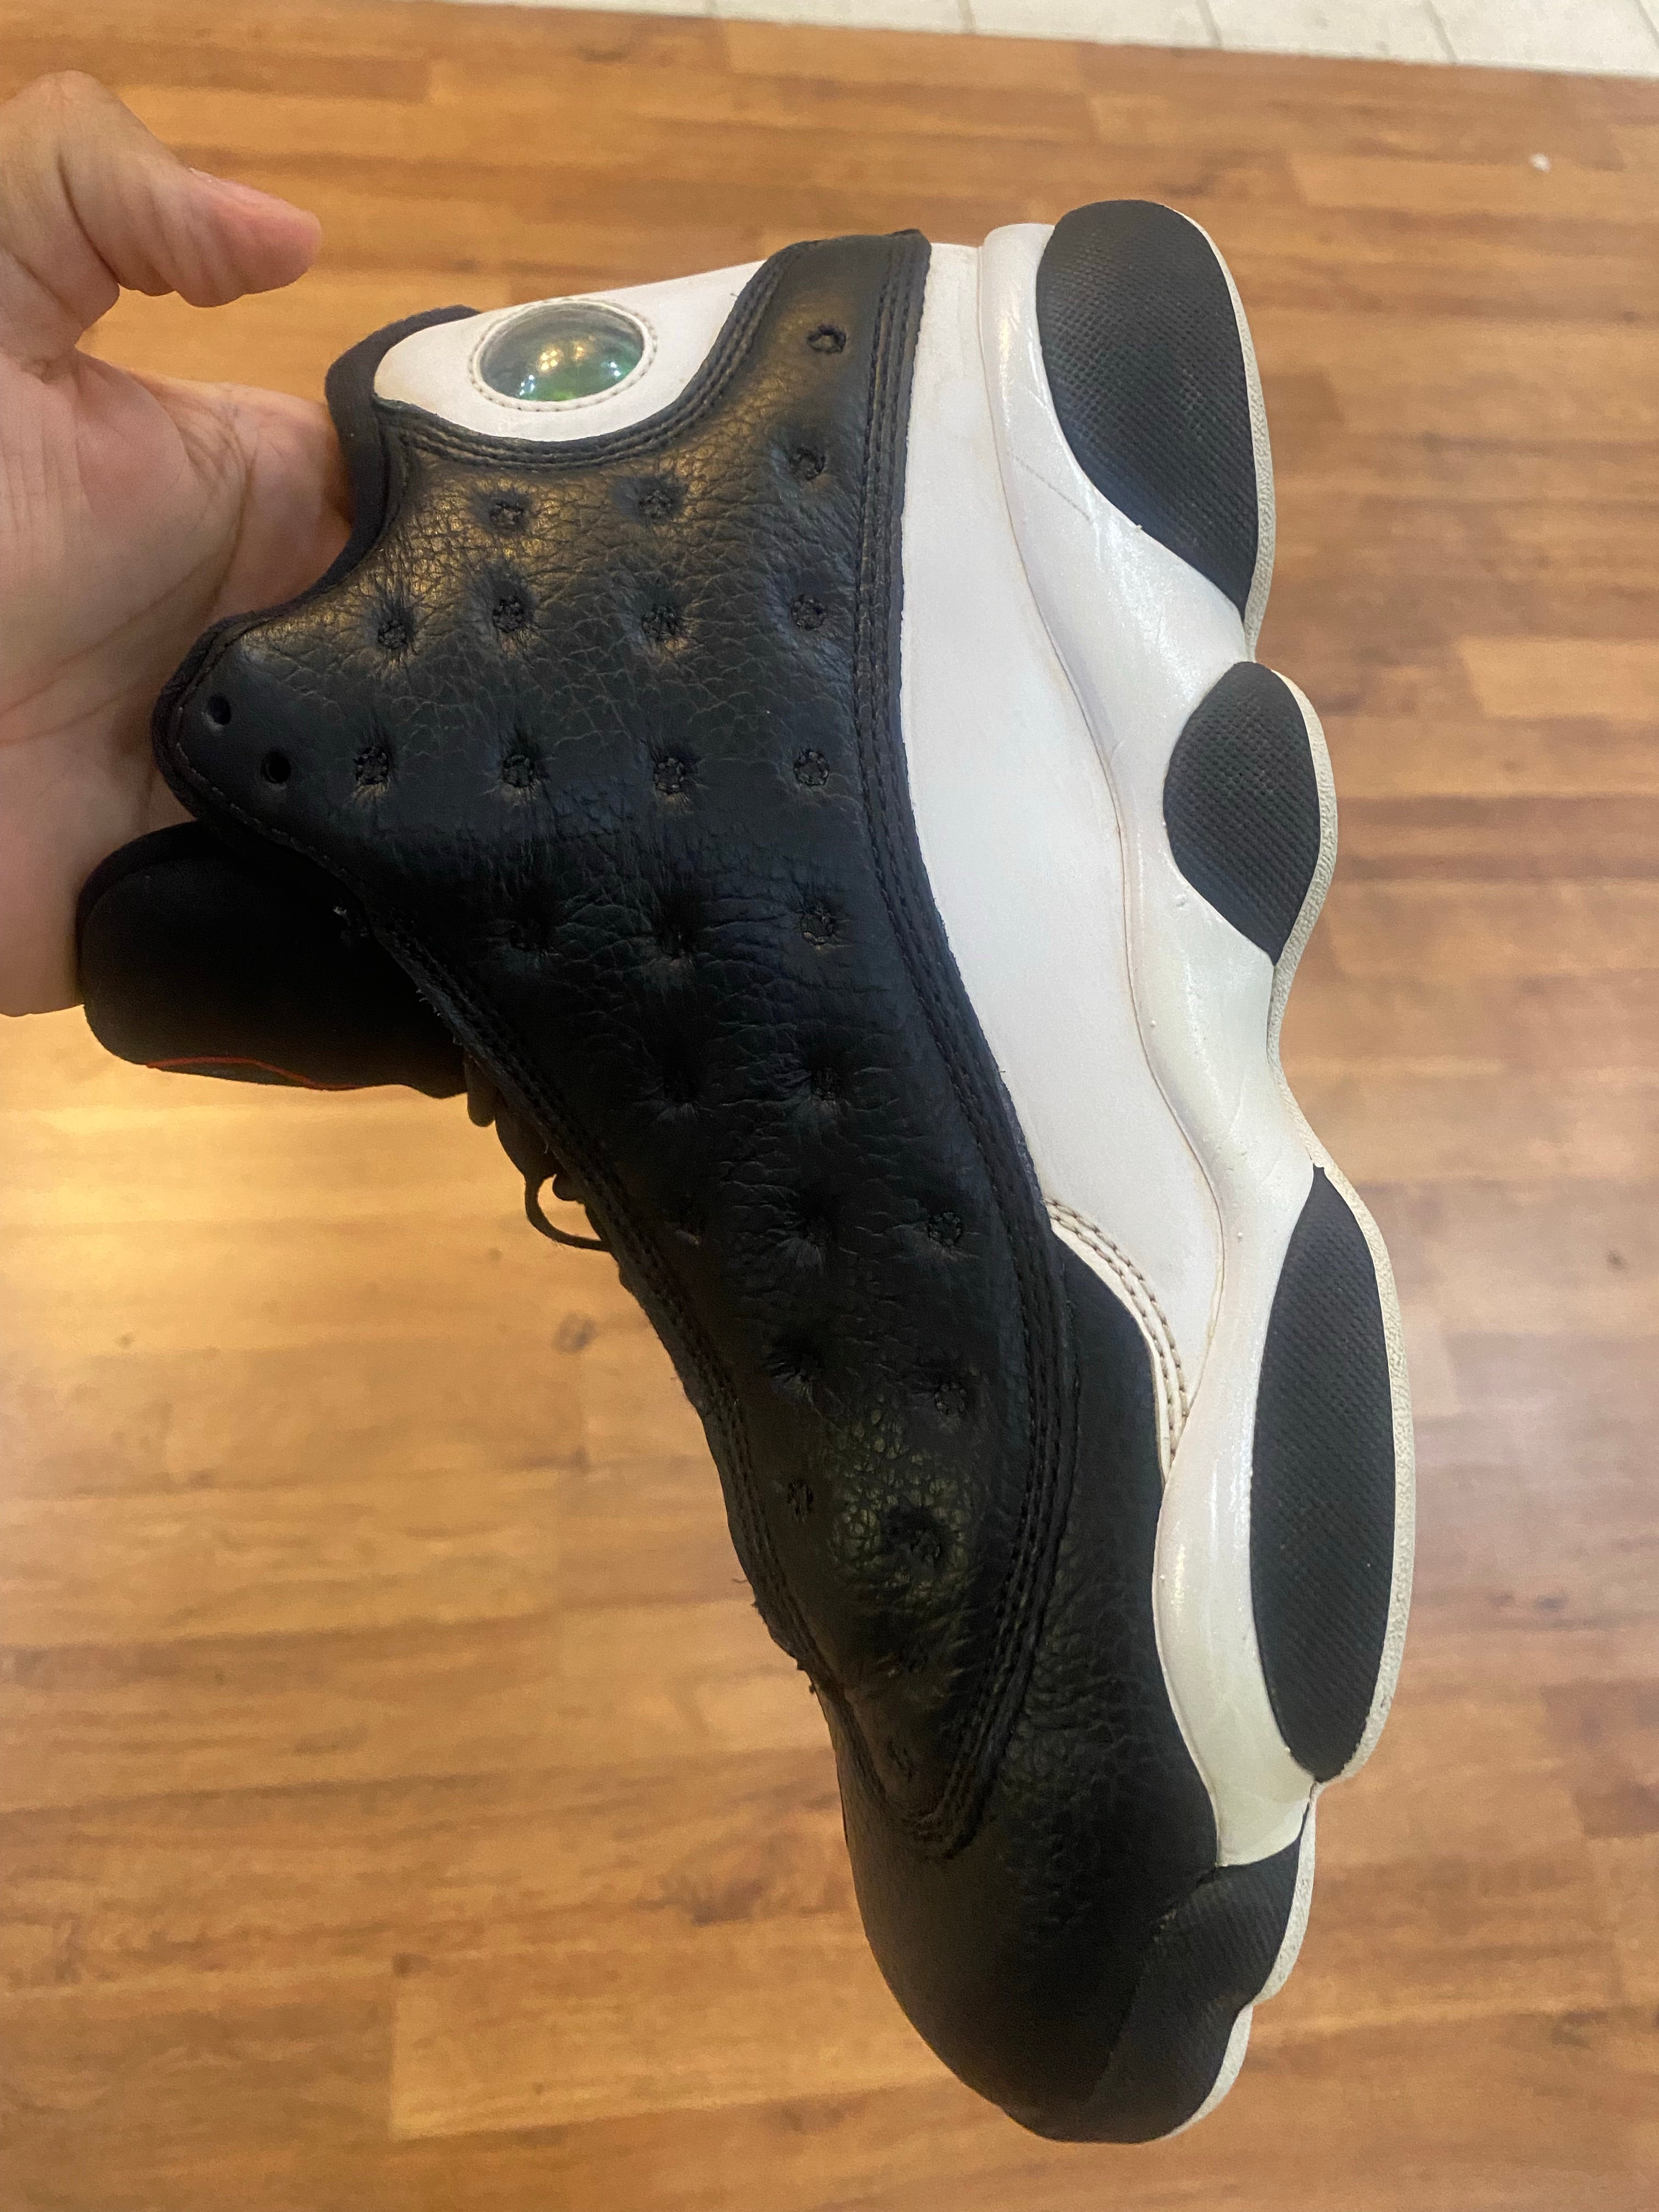 Reverse He got Game 13s size 8.5